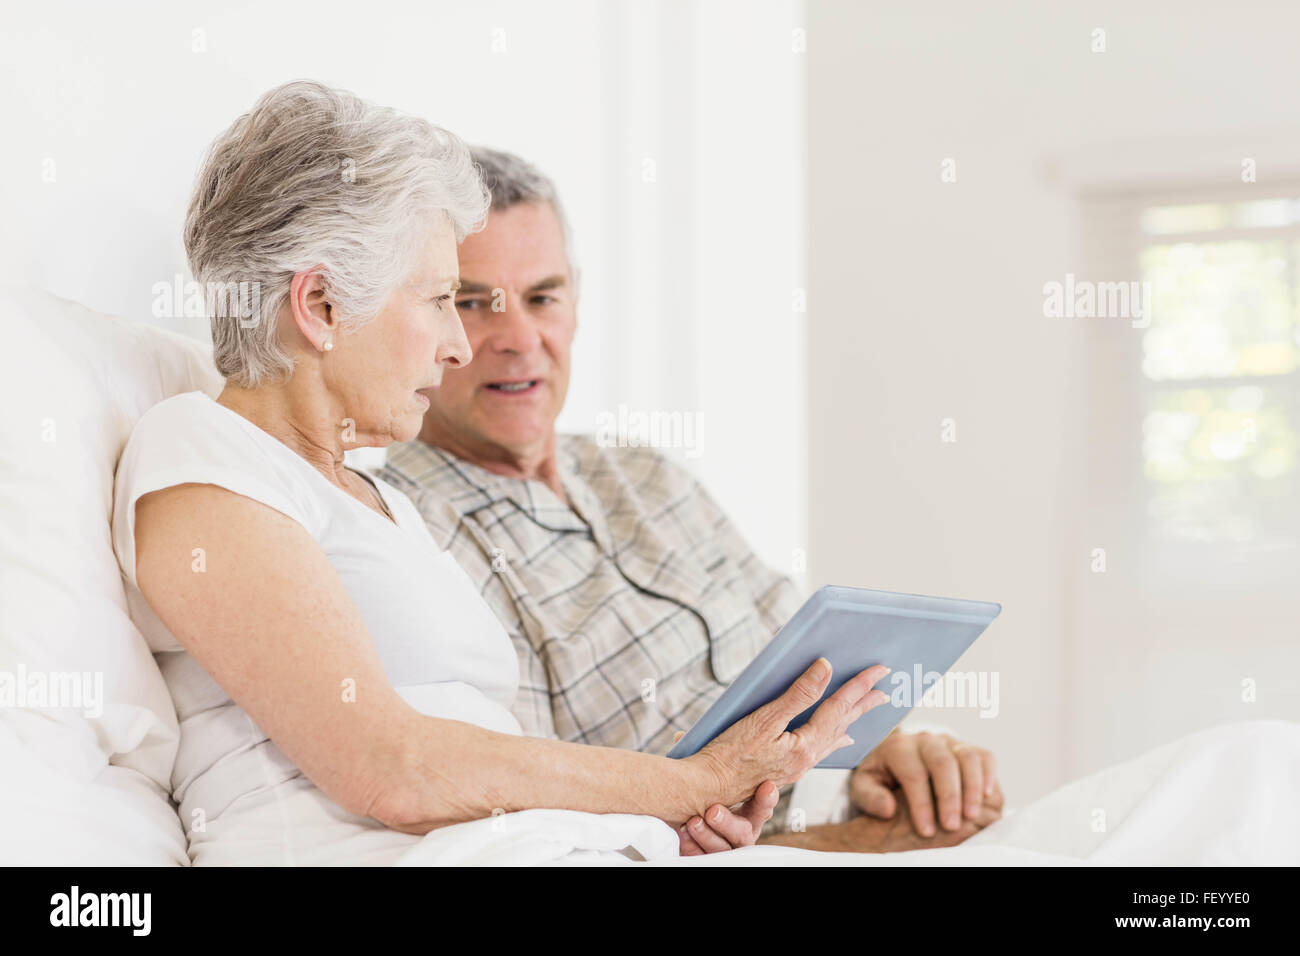 Couple using tablet on bed Banque D'Images